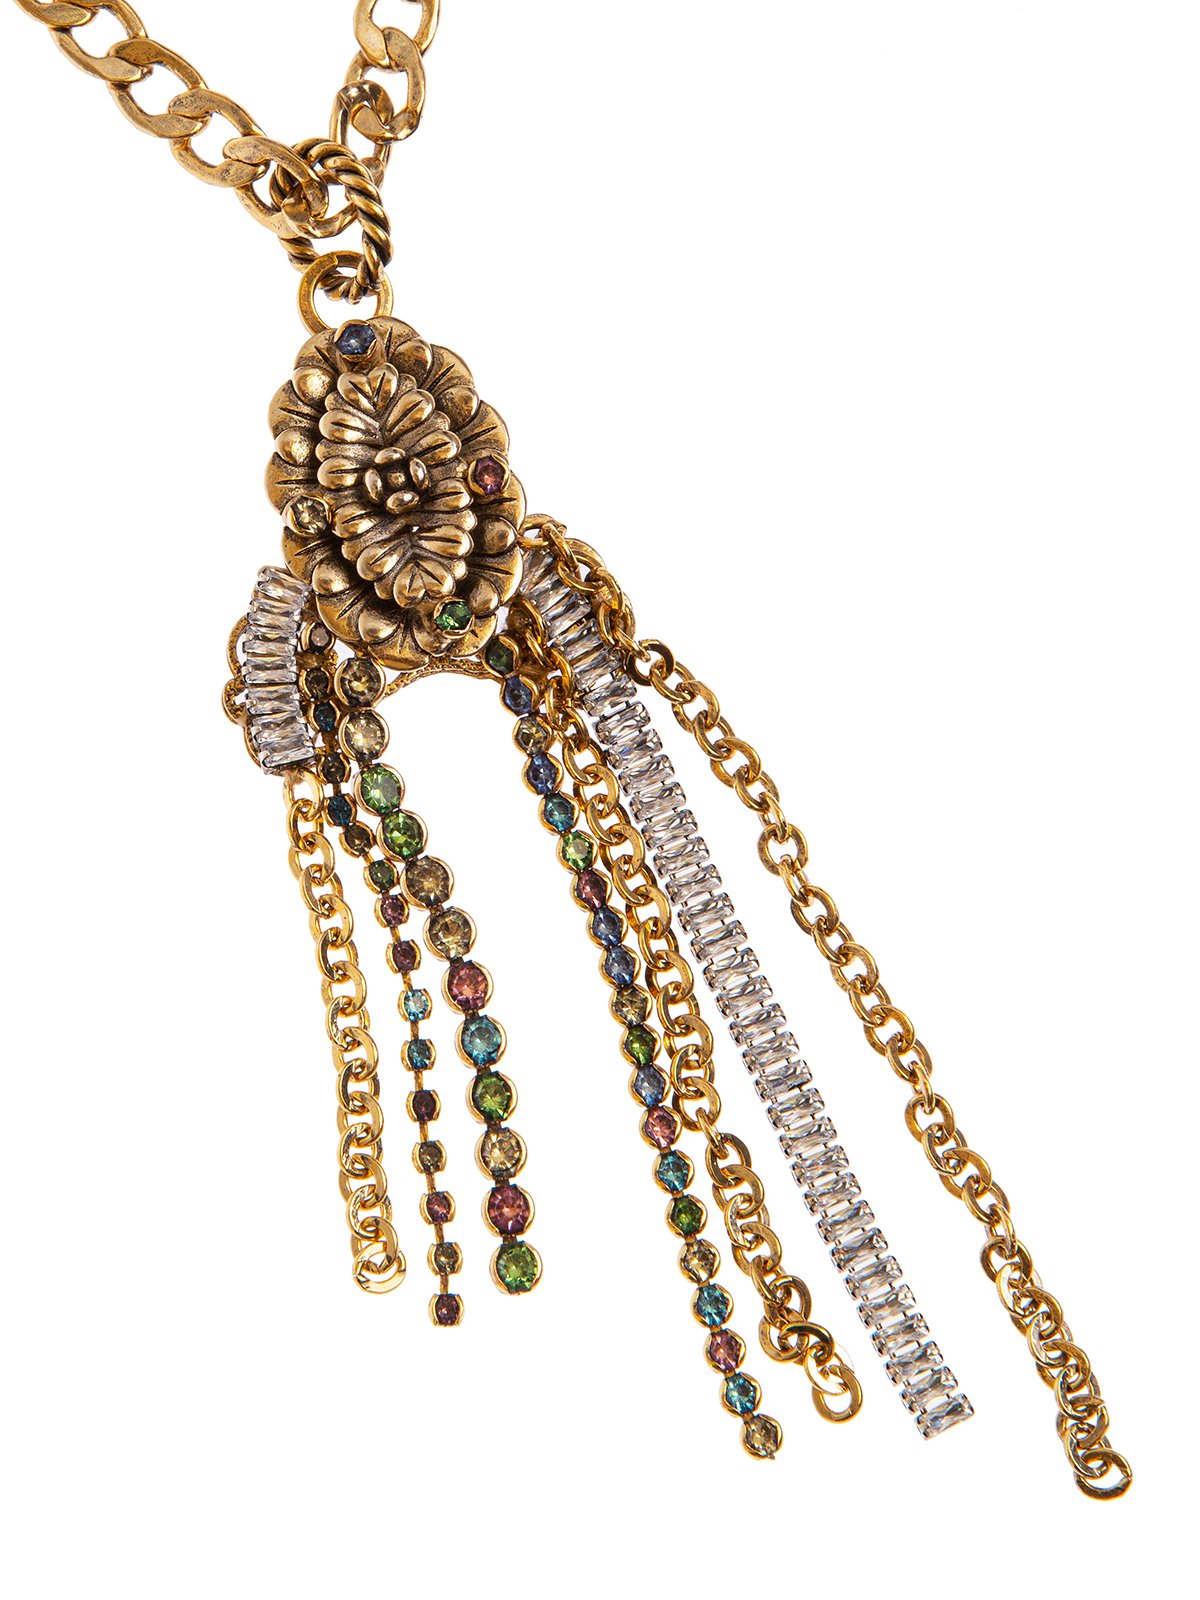 Chain necklace with central flower embellished with stones and chain cascade